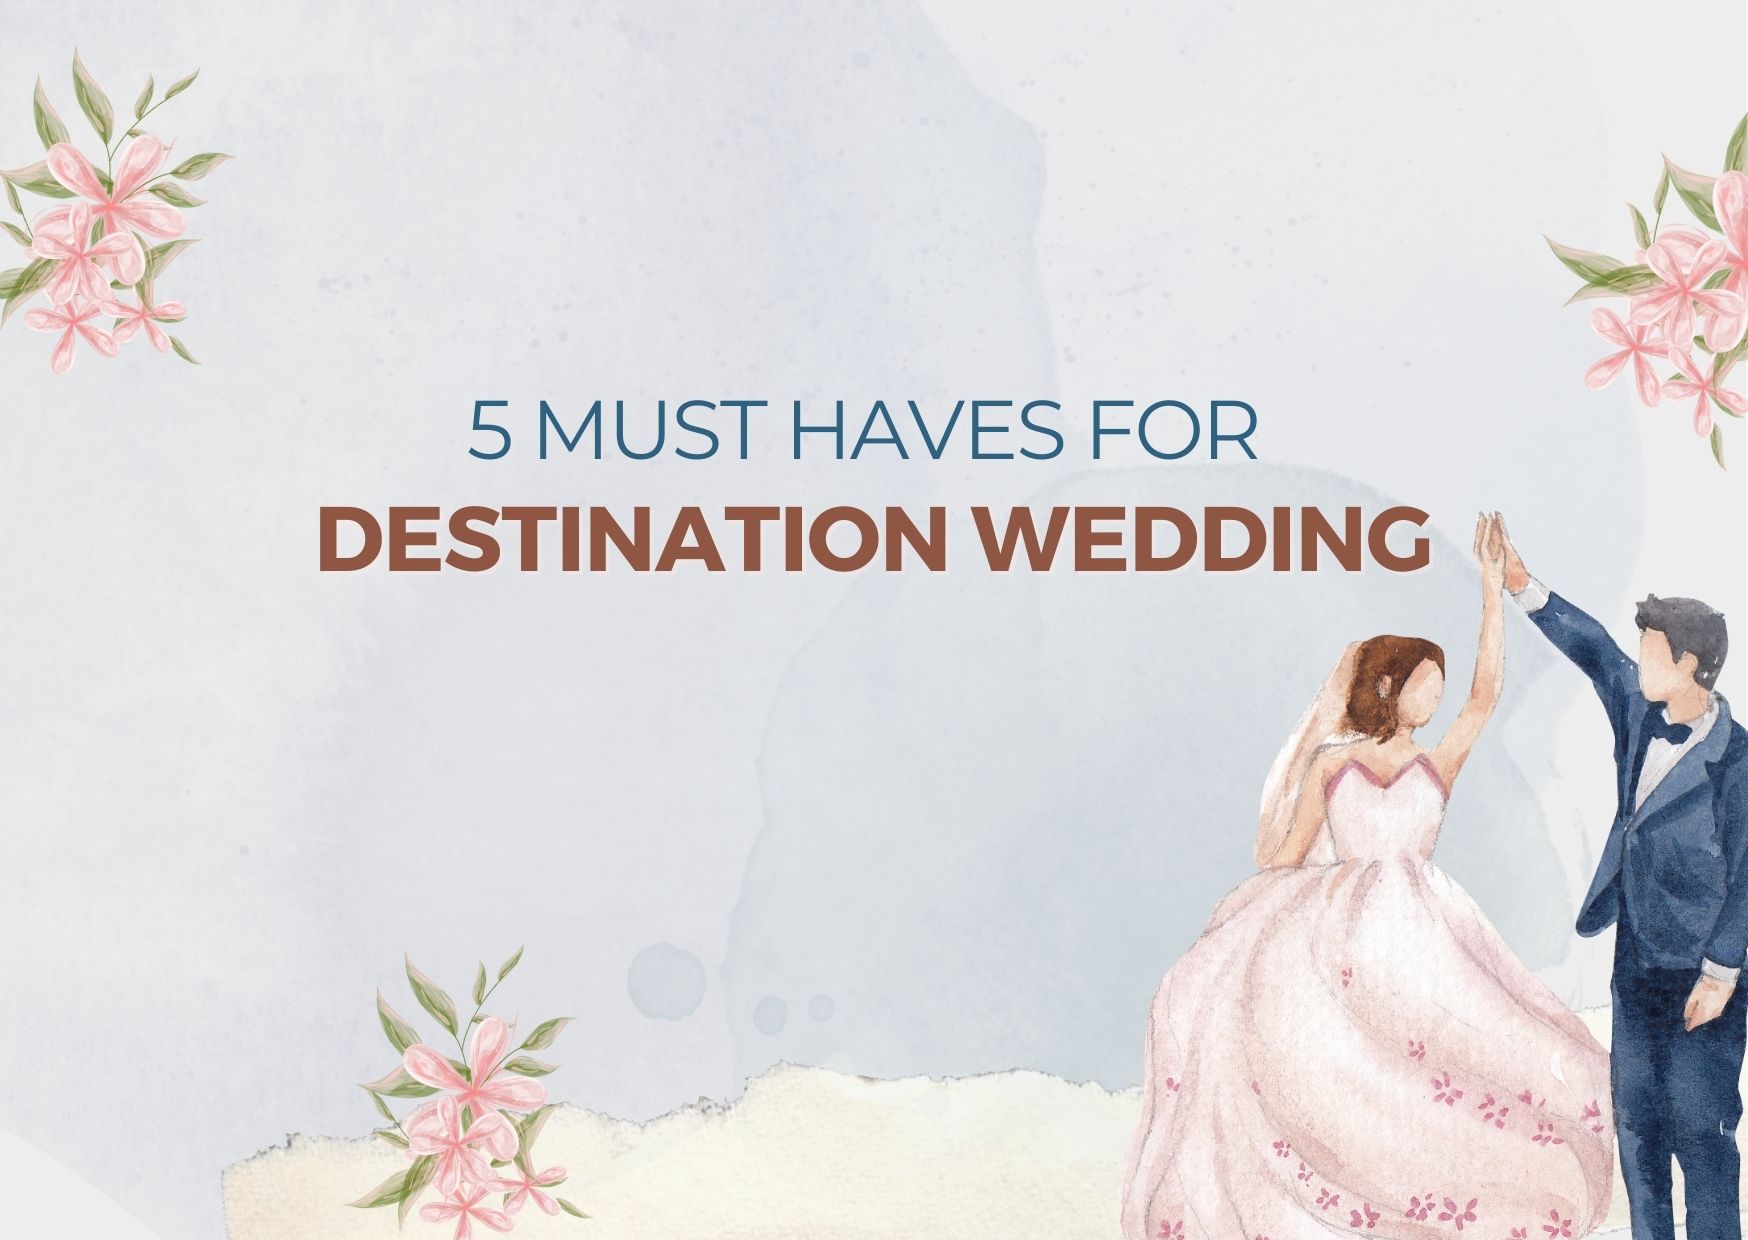 5 Must Haves for Destination Wedding